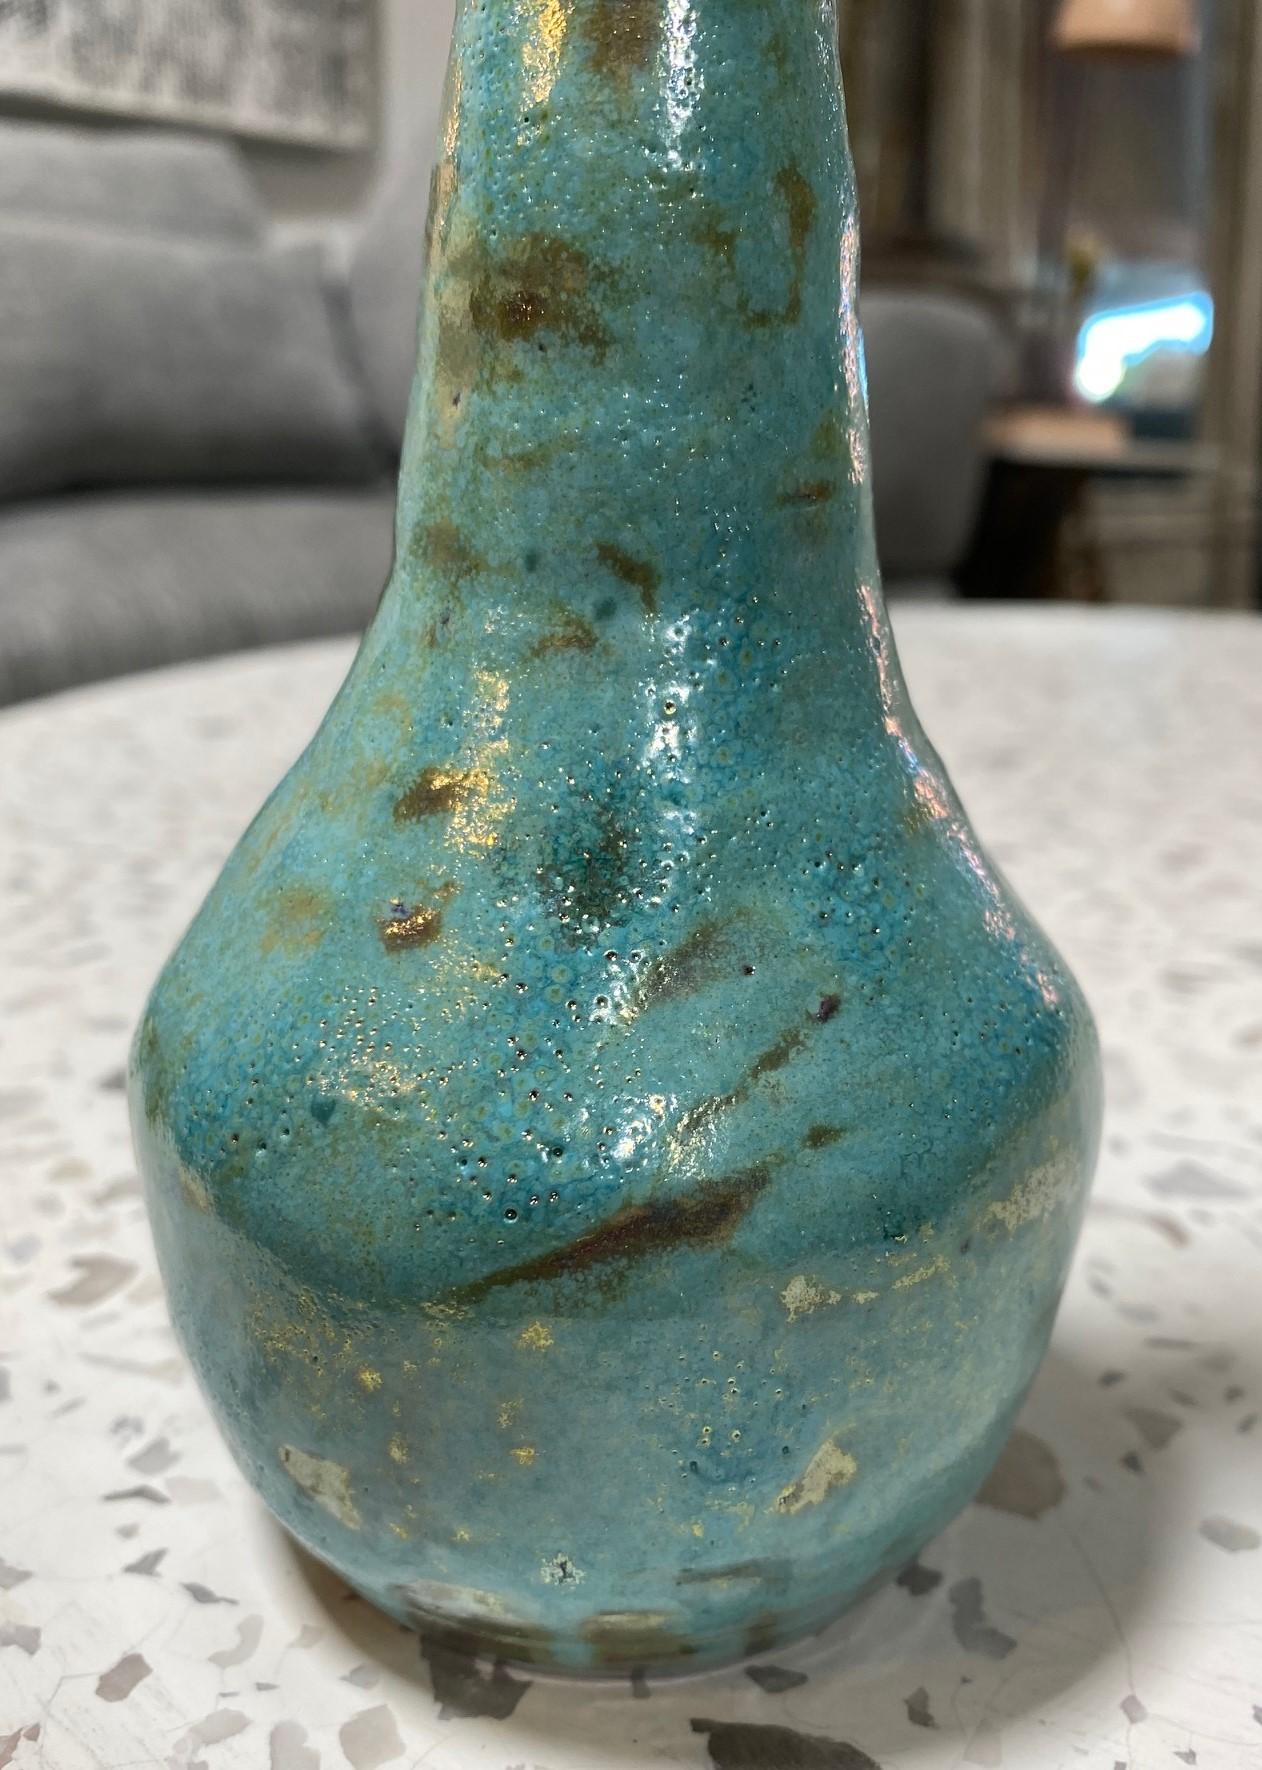 Beatrice Wood Signed Midcentury California Studio Pottery Luster Glaze Vase In Good Condition For Sale In Studio City, CA